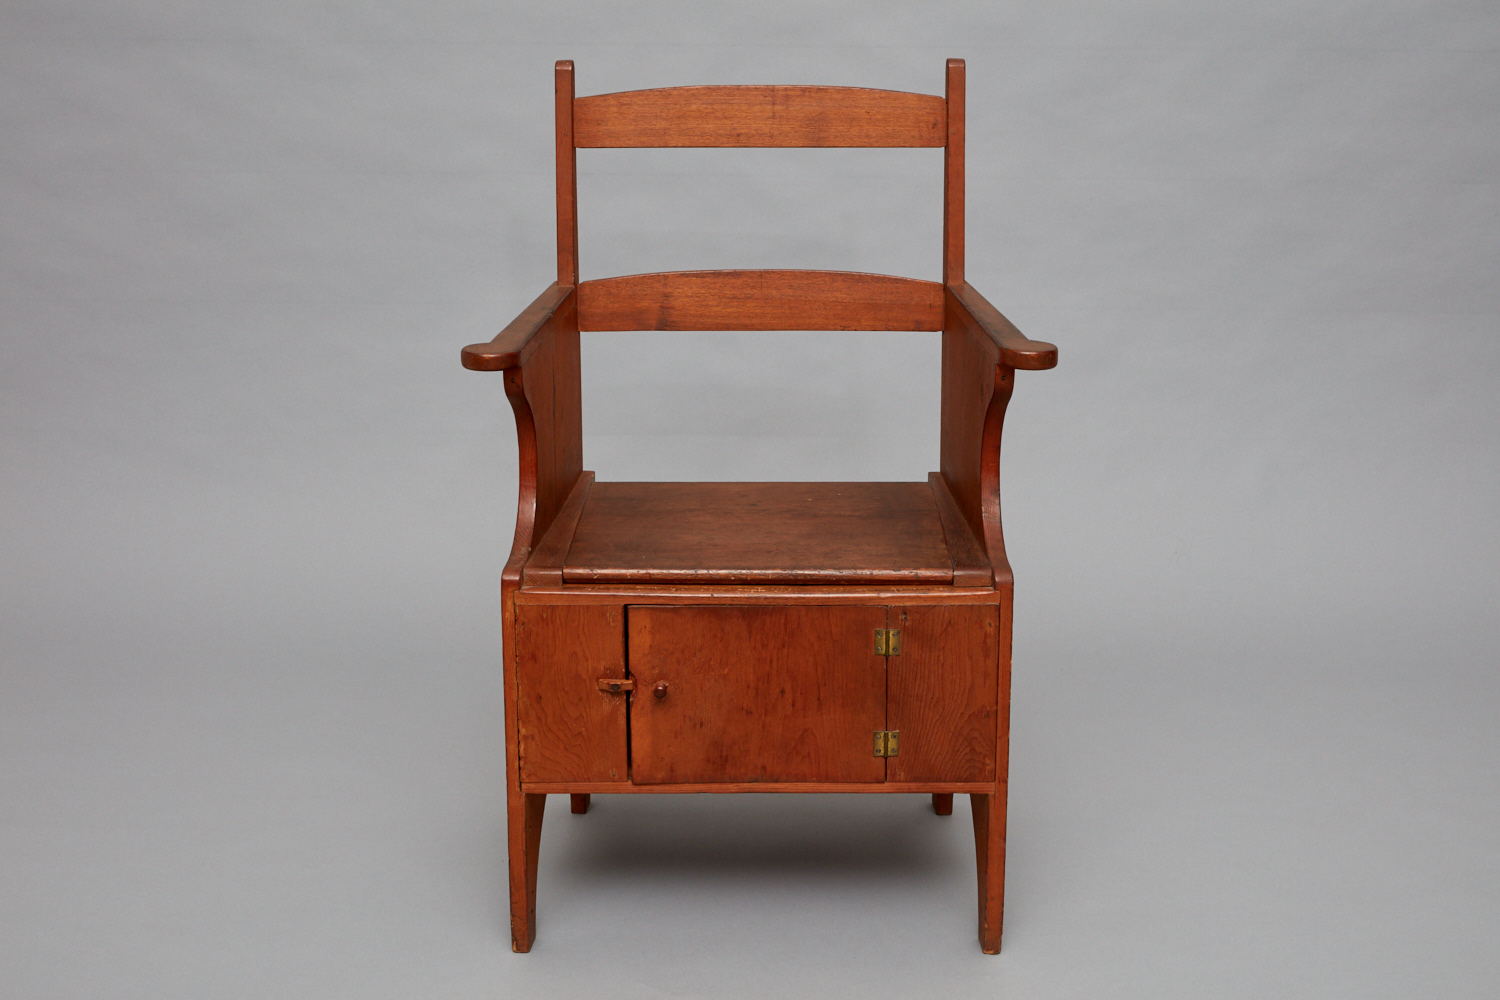 A wooden chair with a wooden seat and a drawer.